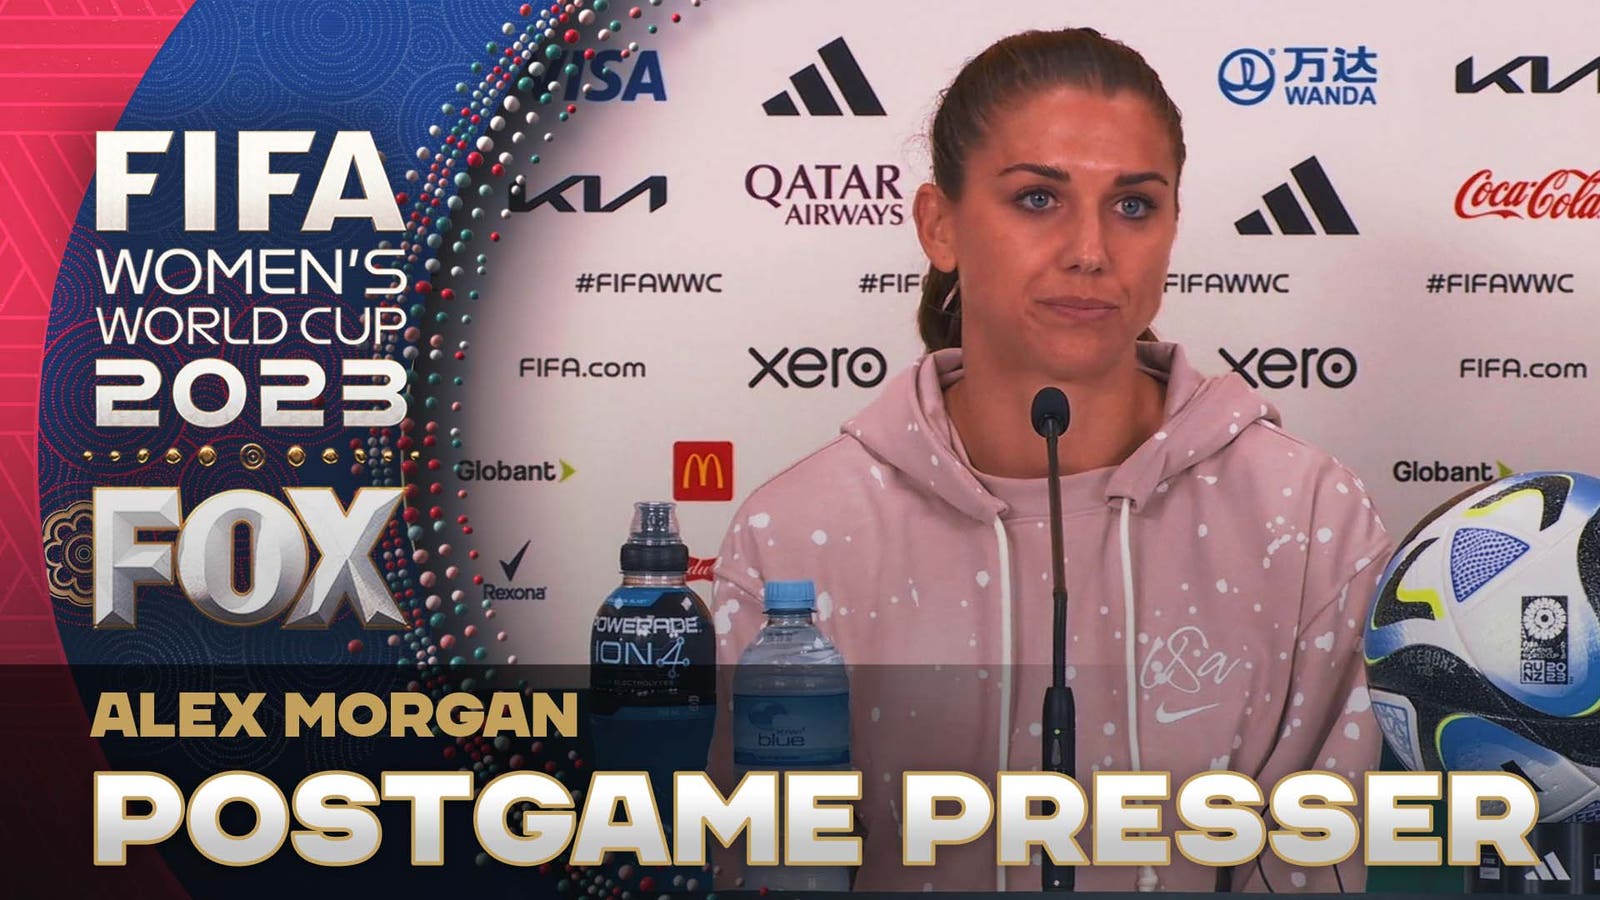 "We're not happy with the performance" - Alex Morgan 